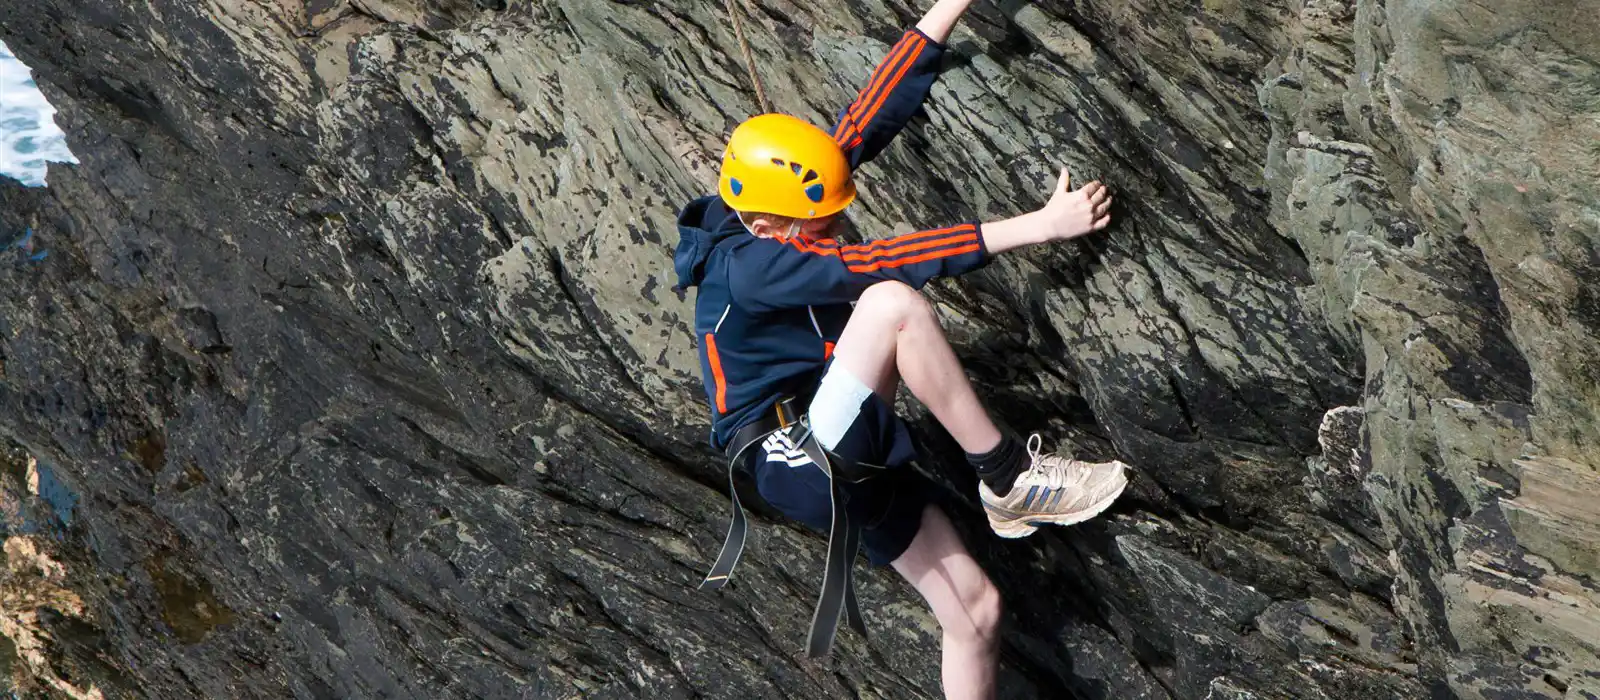 Coasteering is a brilliant day out for people in their teens